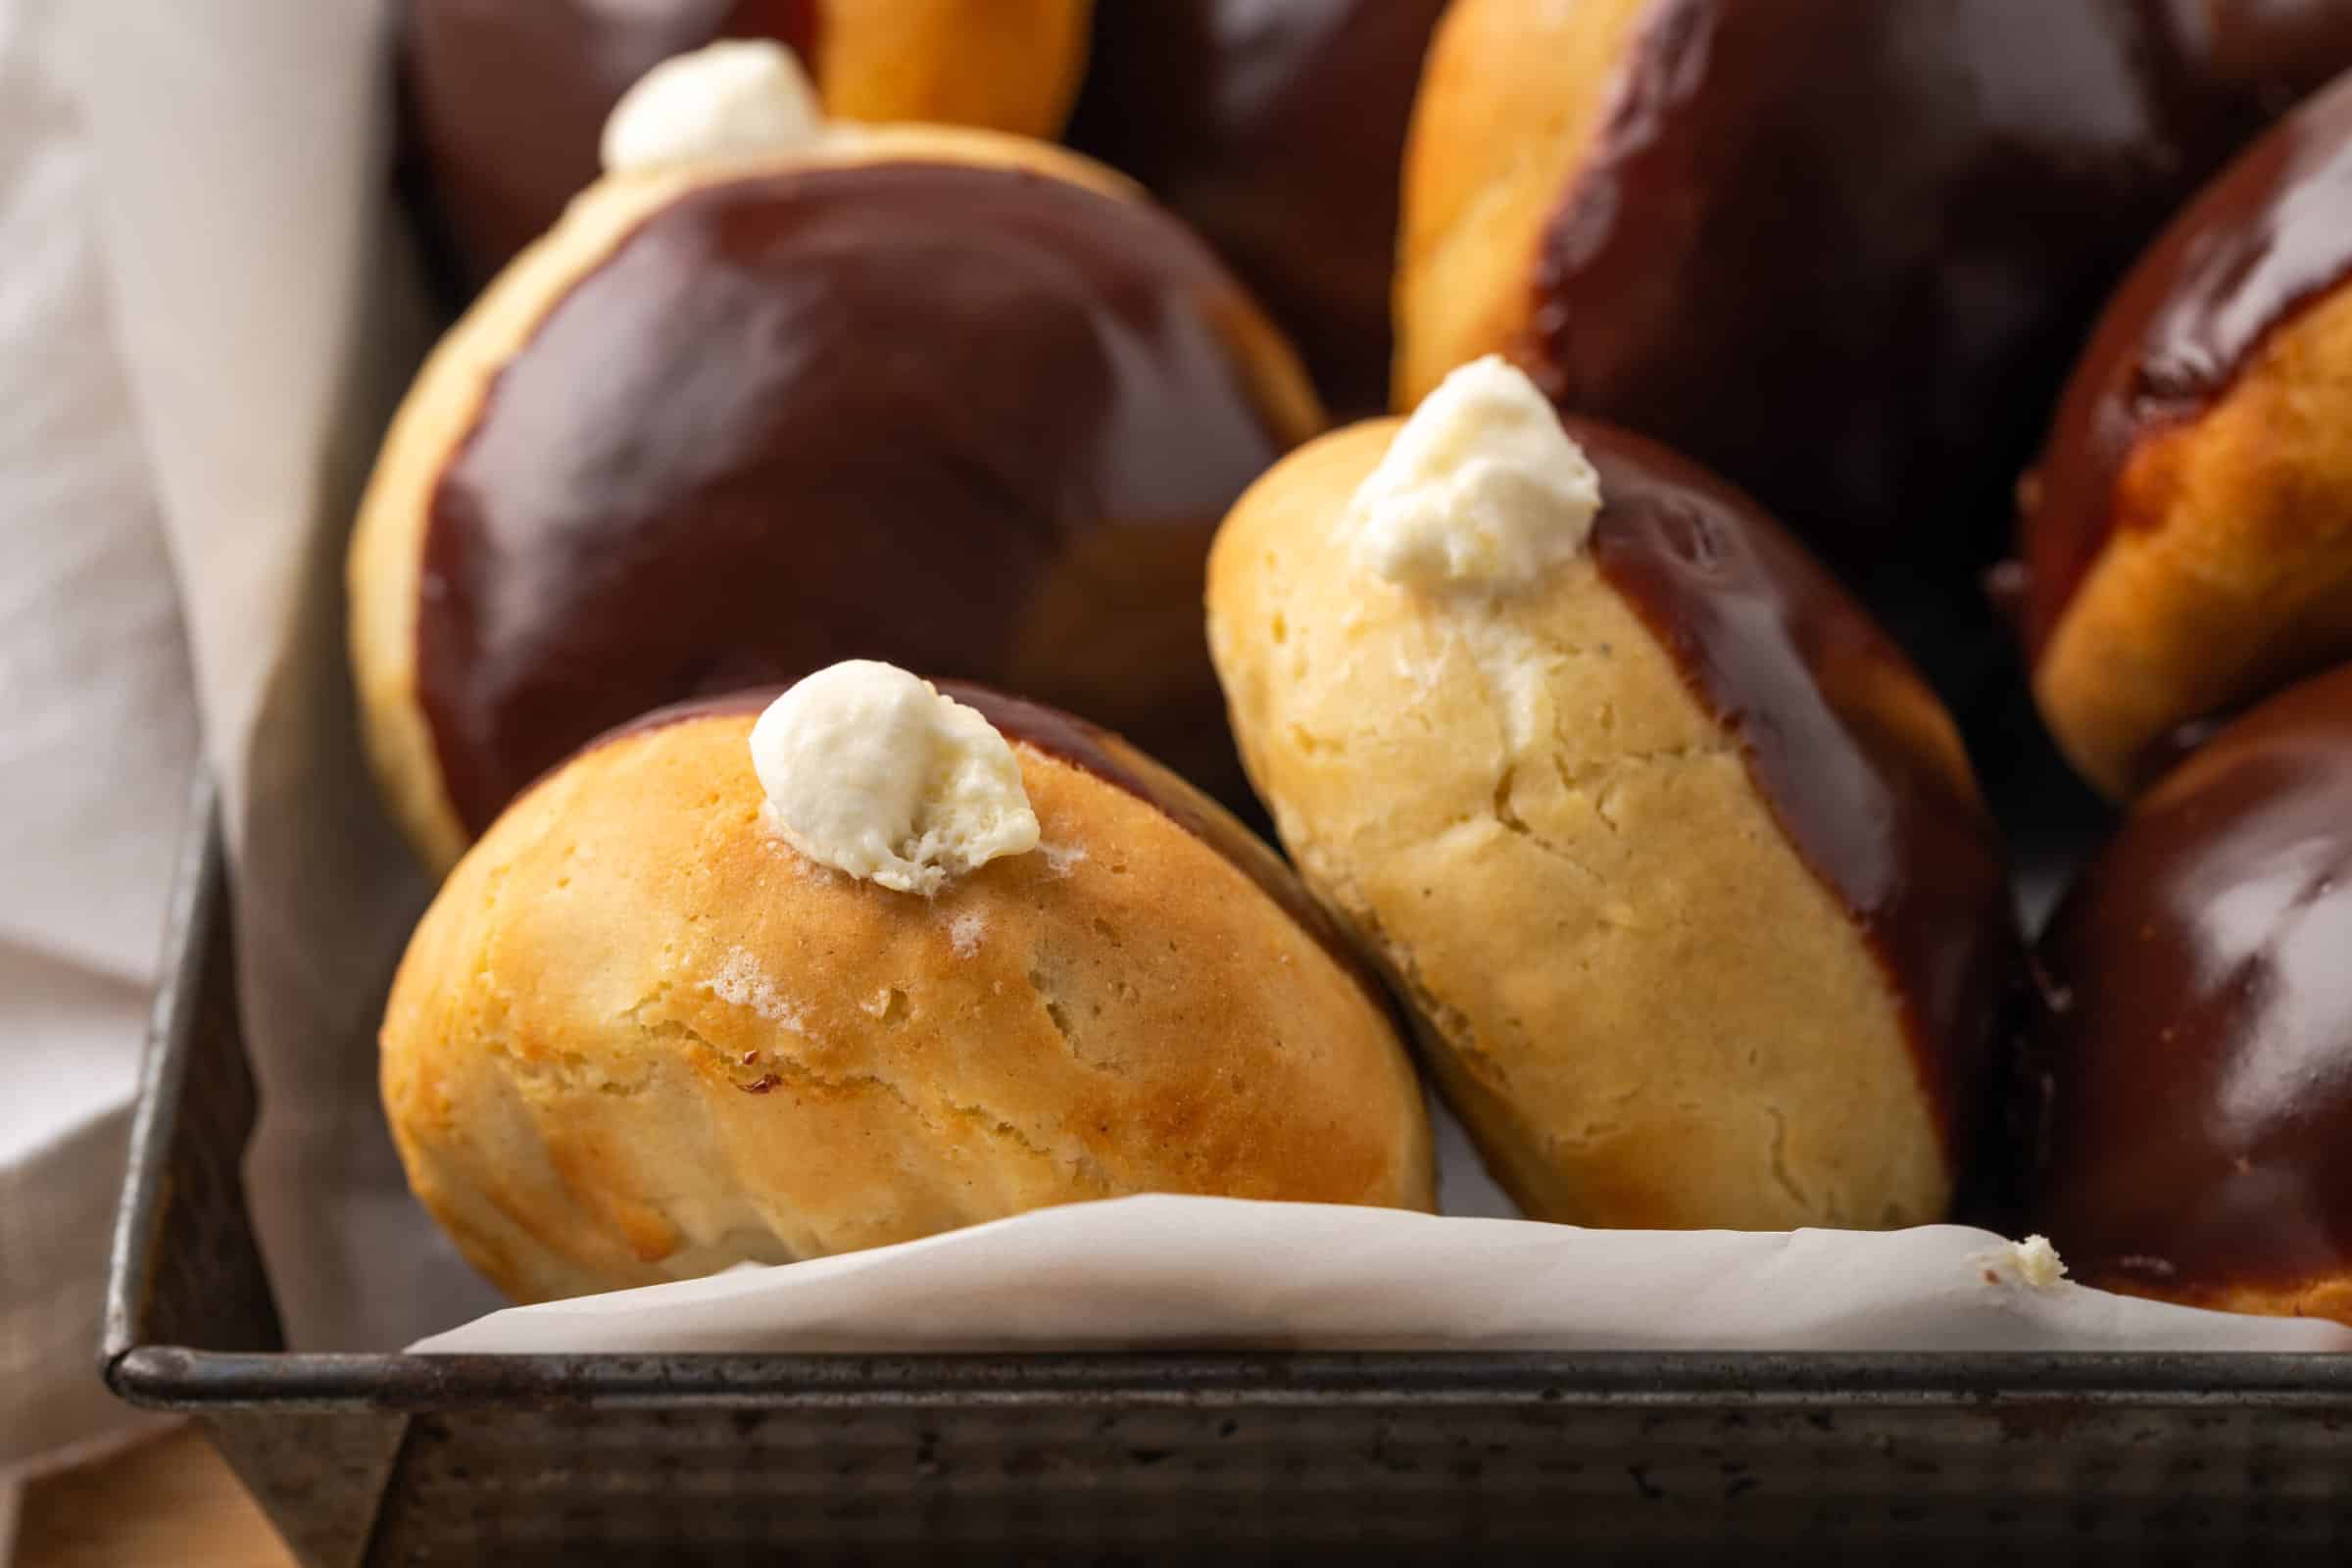 Gluten-free bismark donuts are shown together with chocolate glaze and pastry cream.